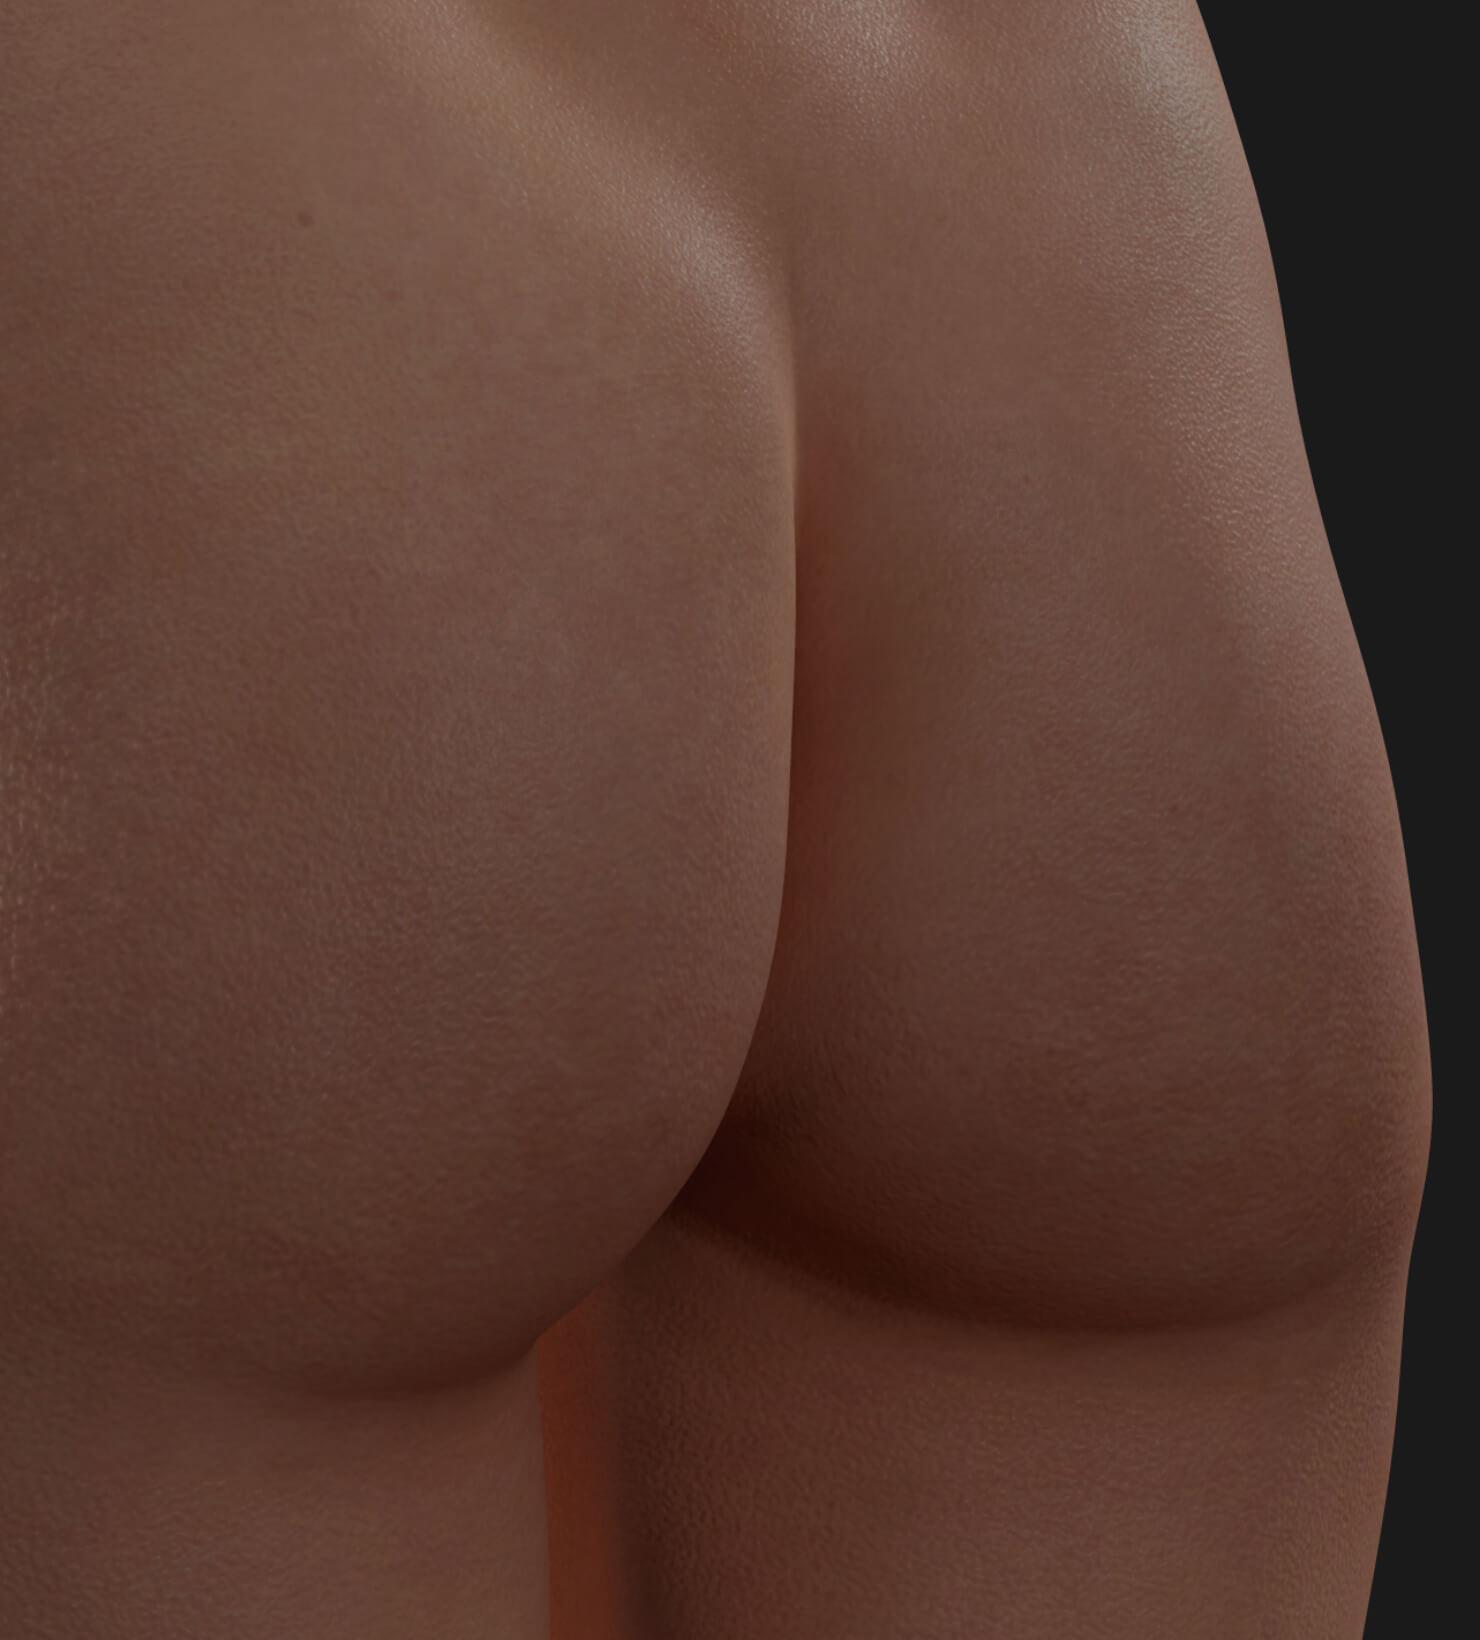 Buttocks of a Clinique Chloé female patient wanting a butt lift with Sculptra injections